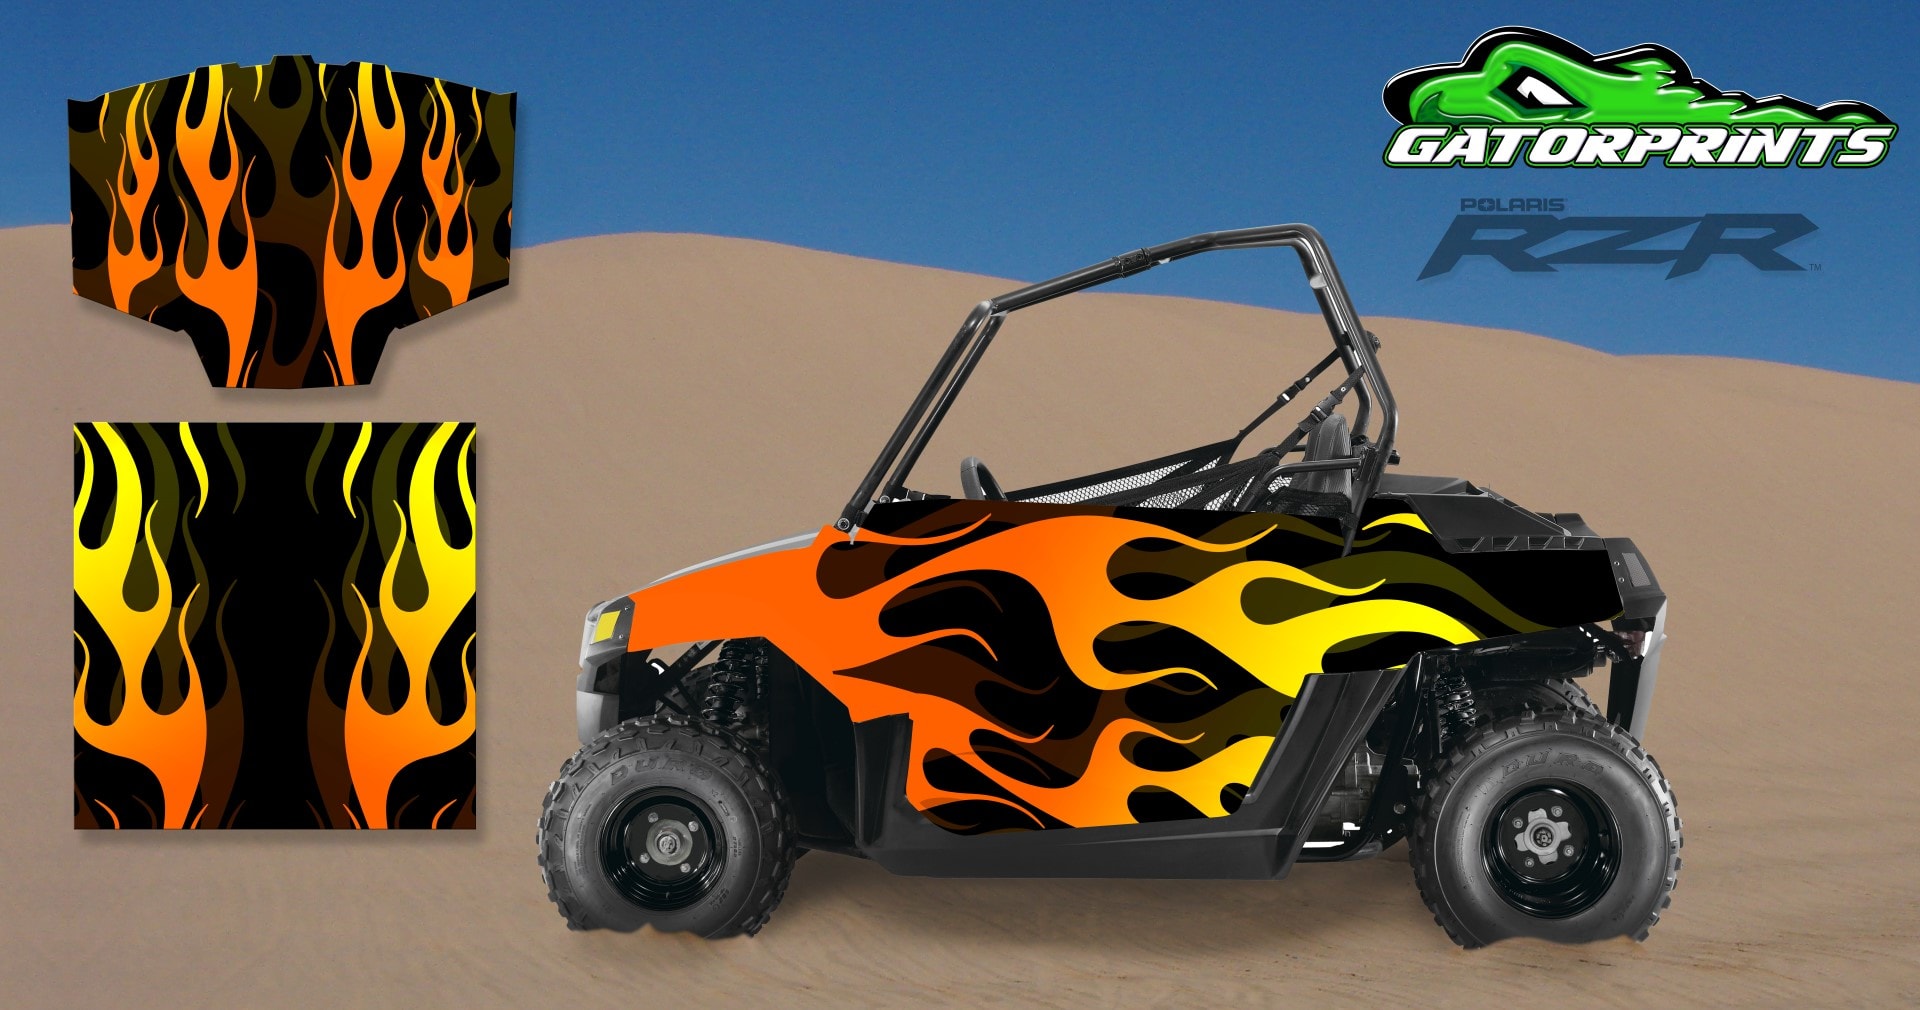 2013, 2014, 2015, 2016 | Youth RZR 170 Graphics Kits